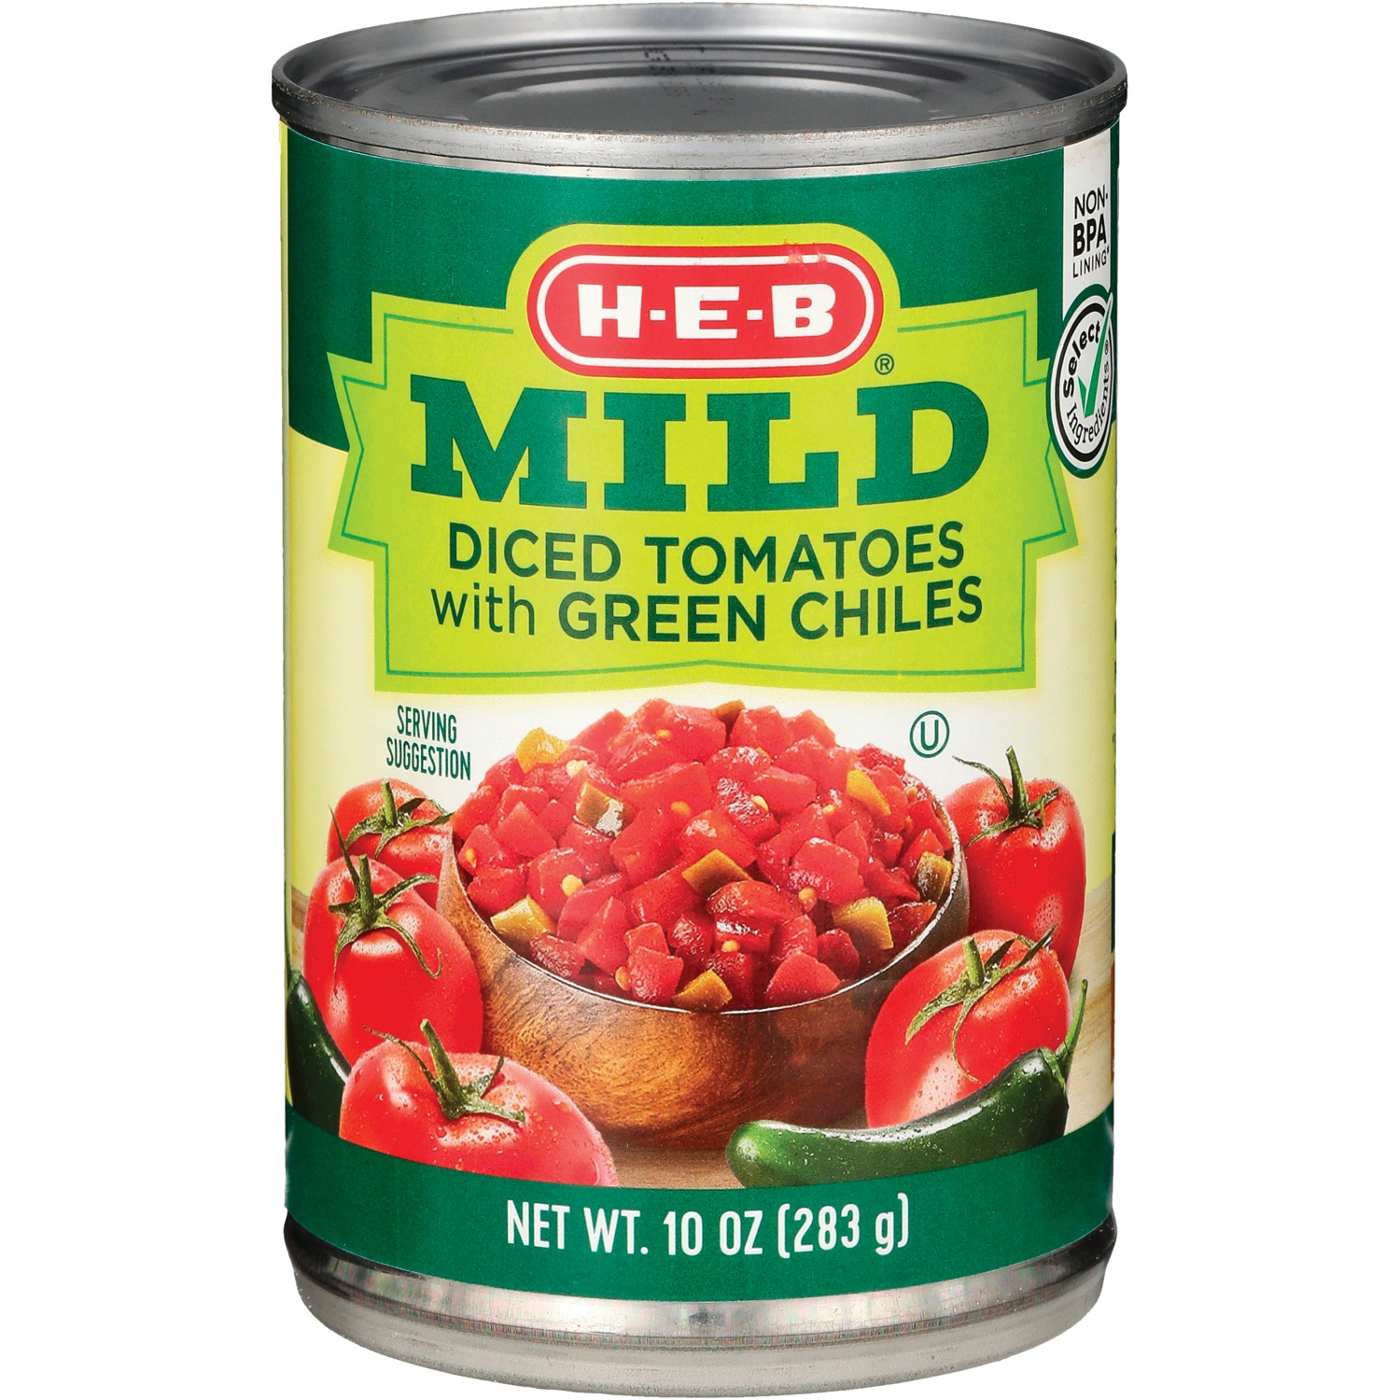 H-E-B Diced Tomatoes with Green Chiles - Mild; image 2 of 2